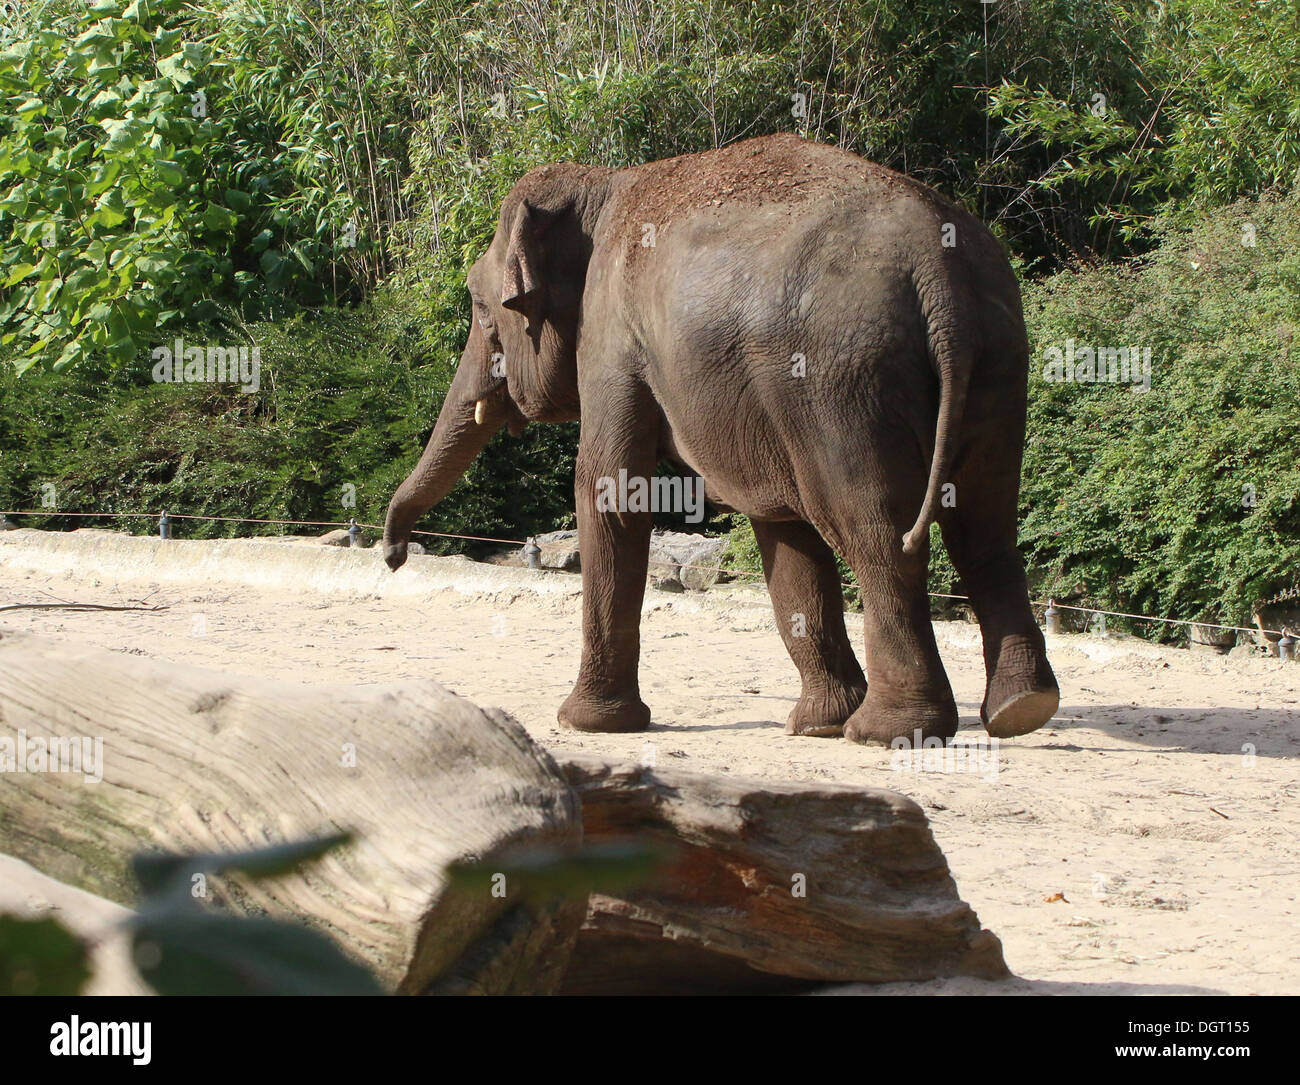 Asian elephant (Elephas maximus) in a natural setting Stock Photo